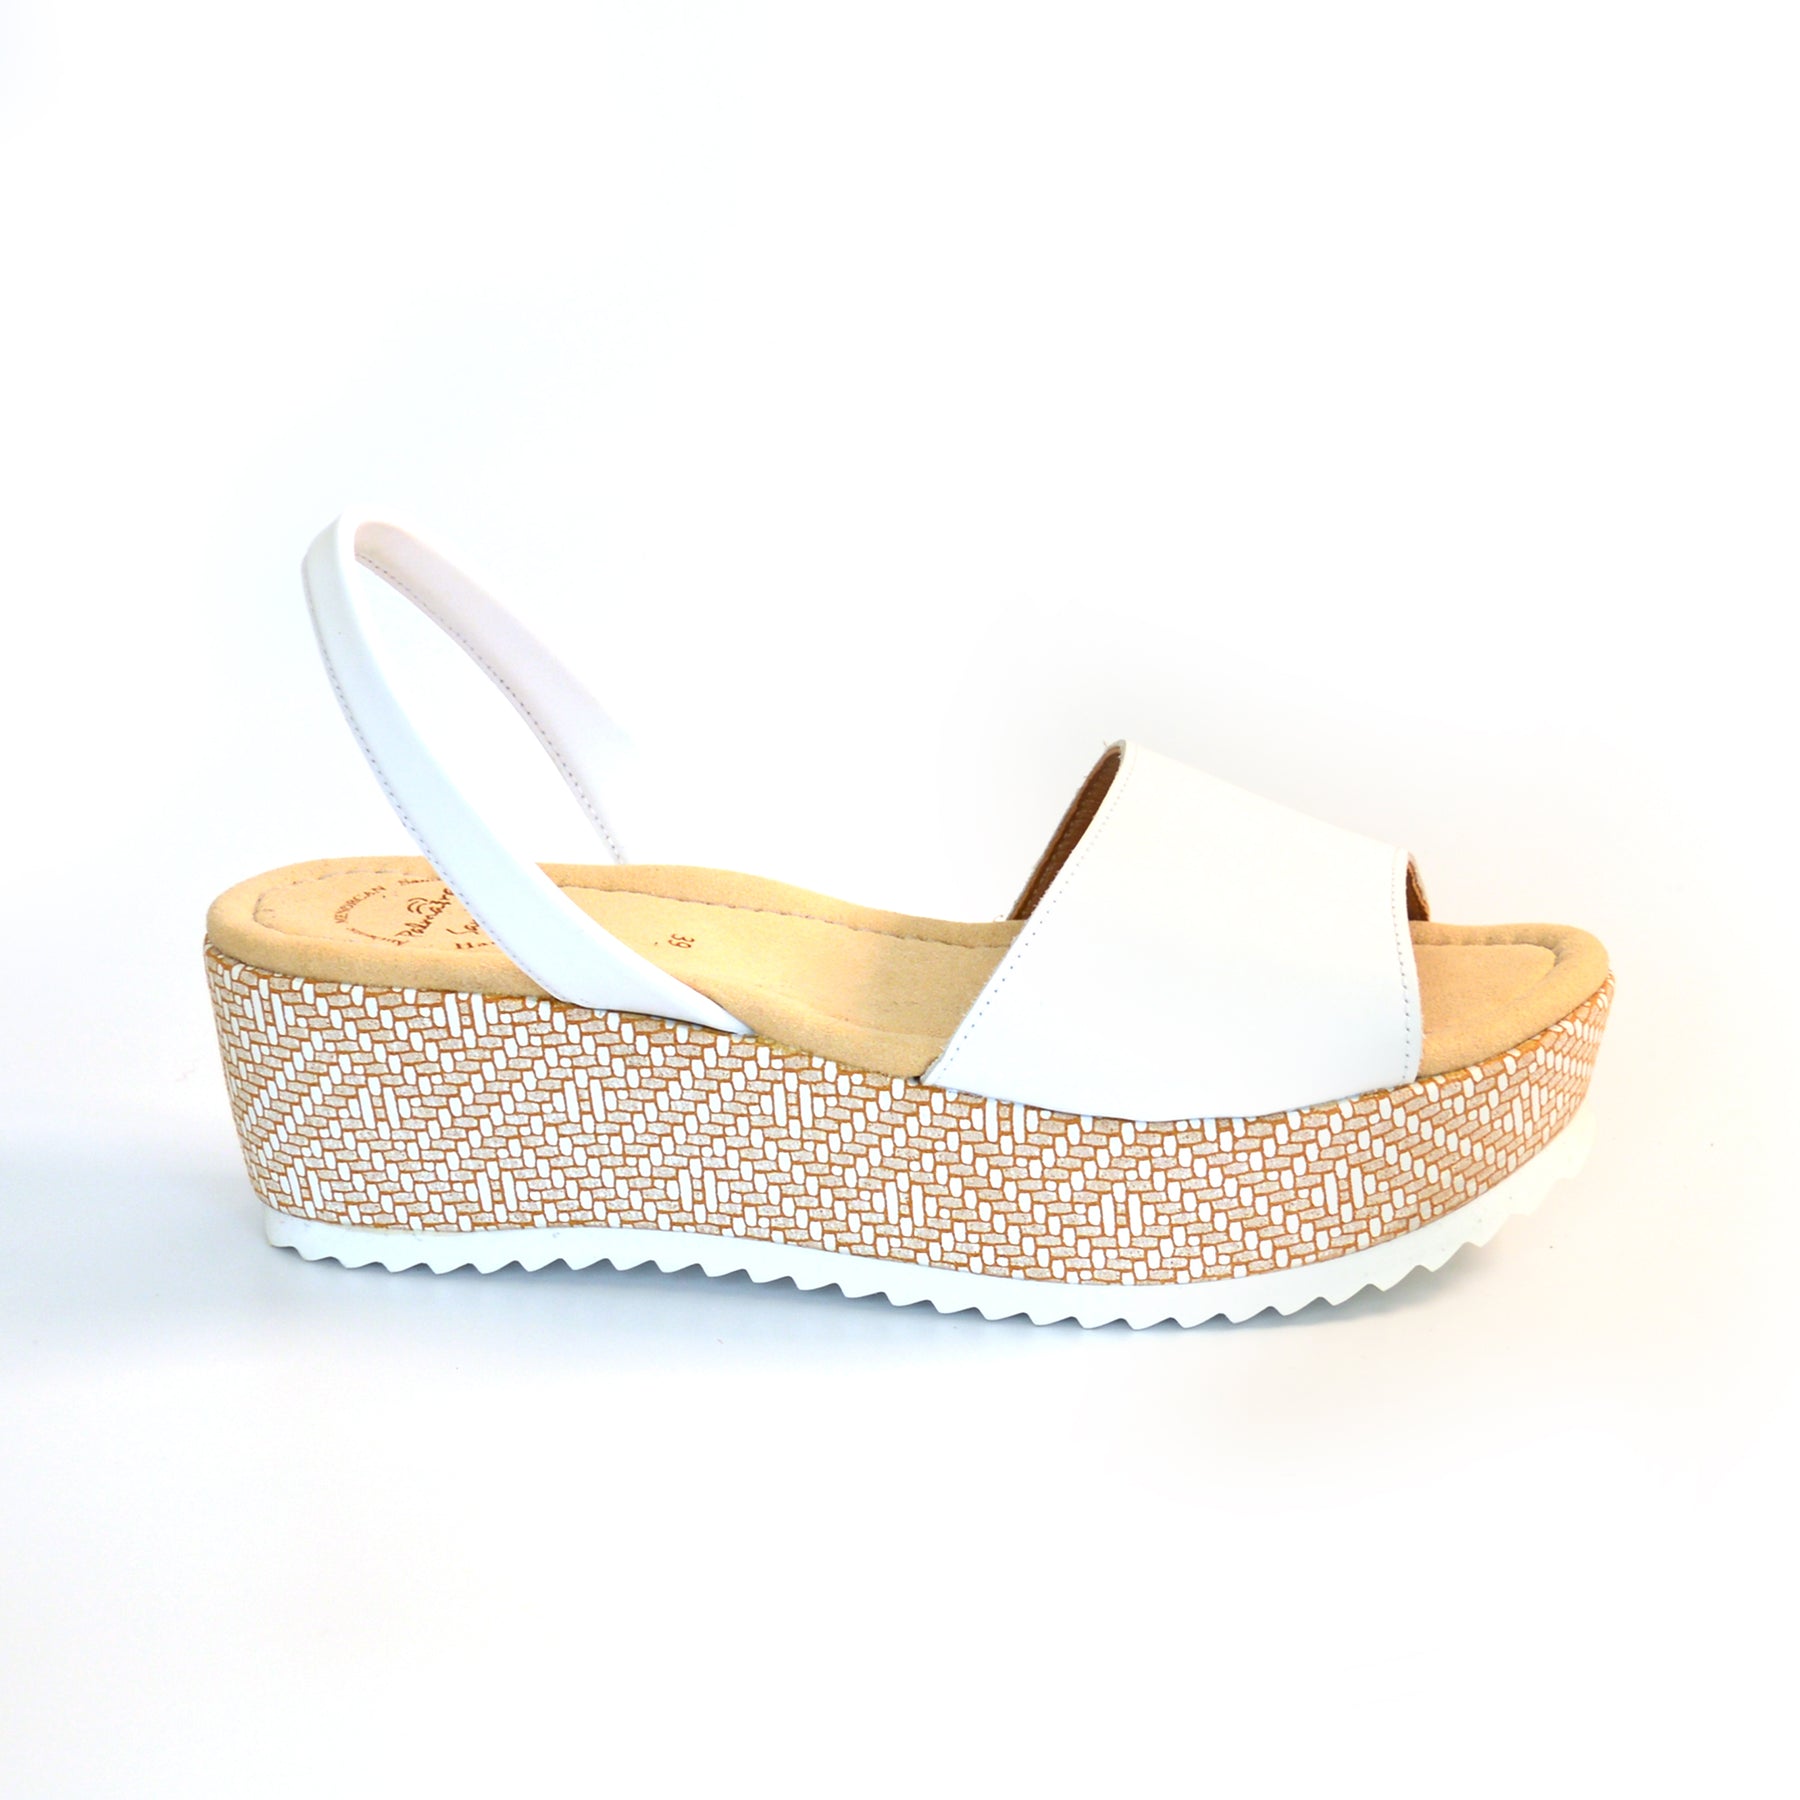 white  leather mid height wedge peeptoe  with slingback and aztec detail on heel avarcas sandals